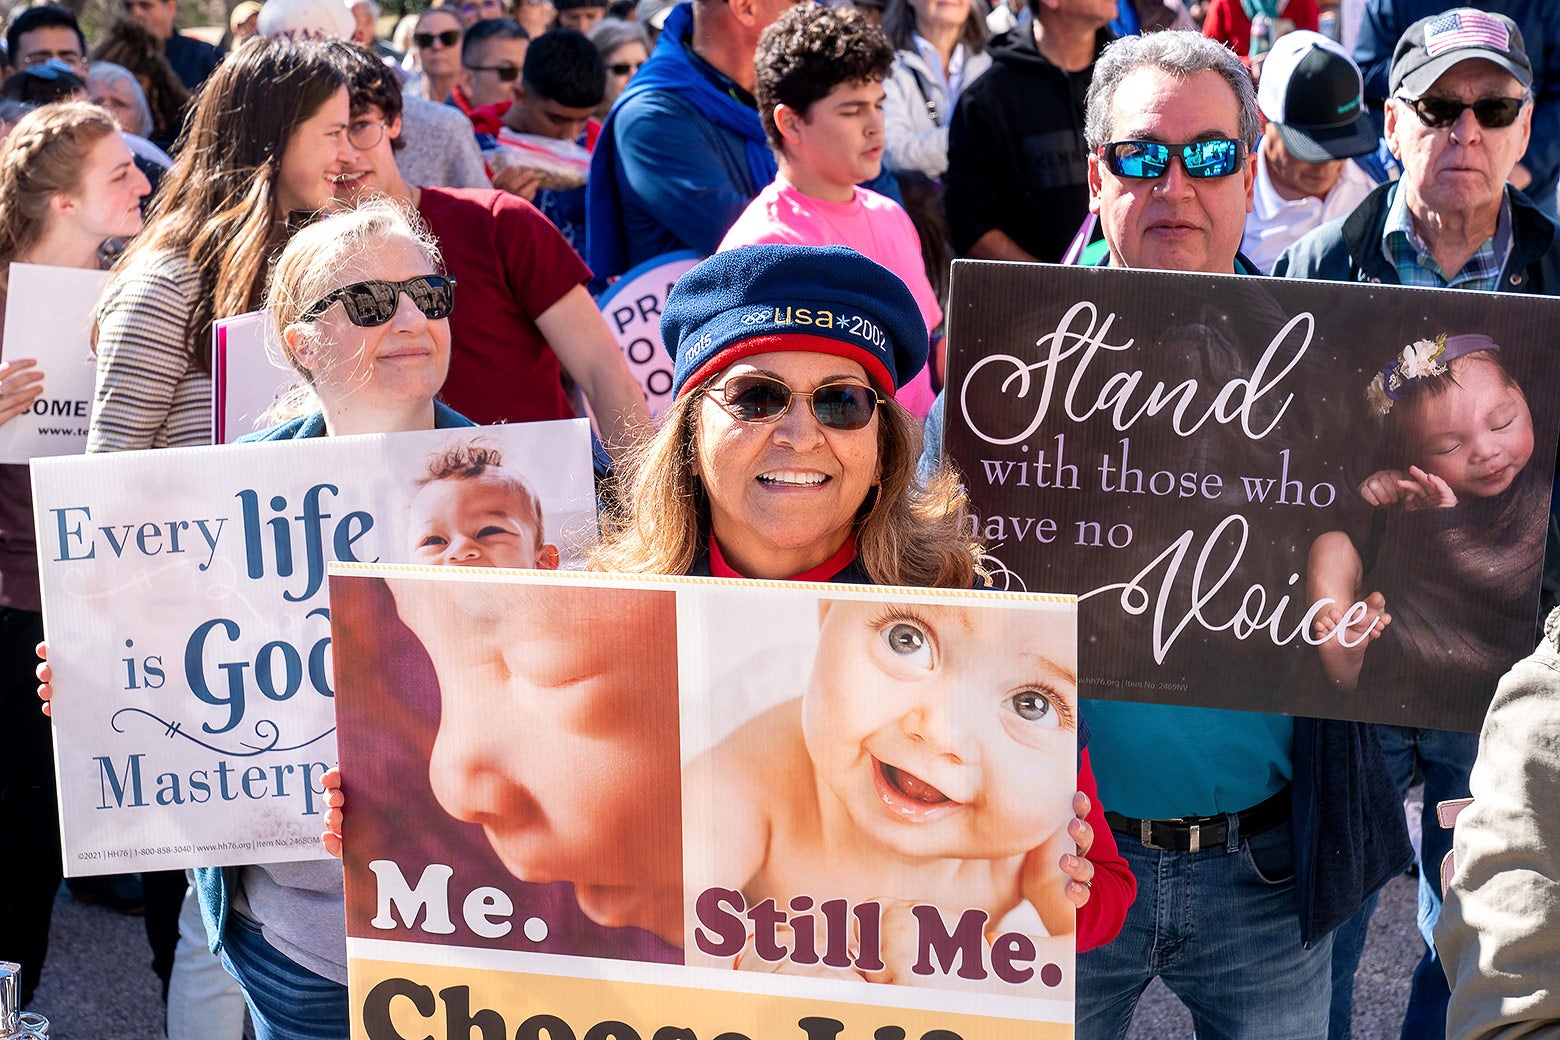 Pro-life supporters take part in a Rally for Life march outside the Texas State Capitol on Jan. 27 in Austin, Texas, holding signs showing babies and fetuses.